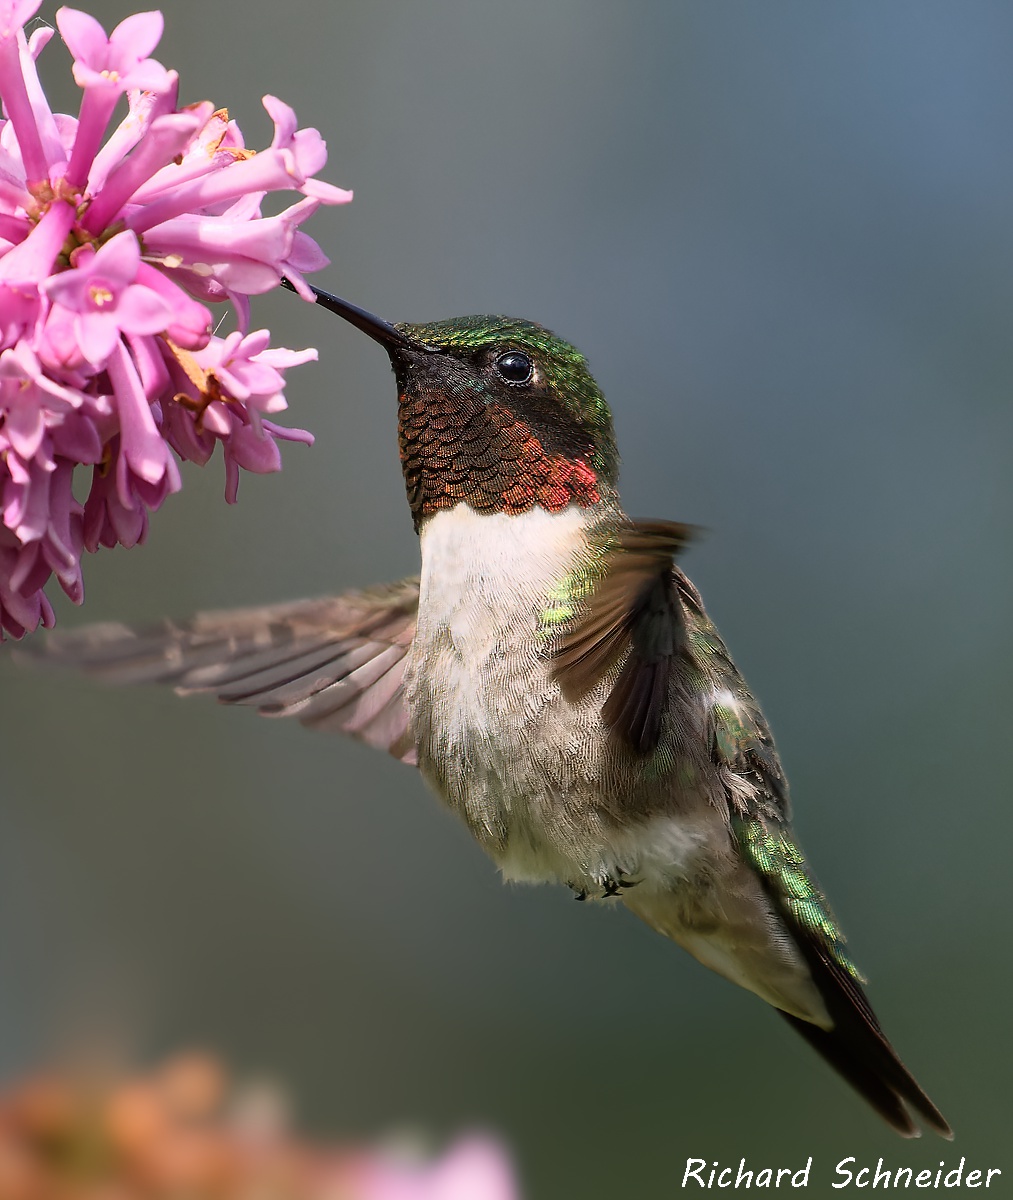 A shutter speed of 1/2500 was insufficient to freeze the wings of this hummingbird,